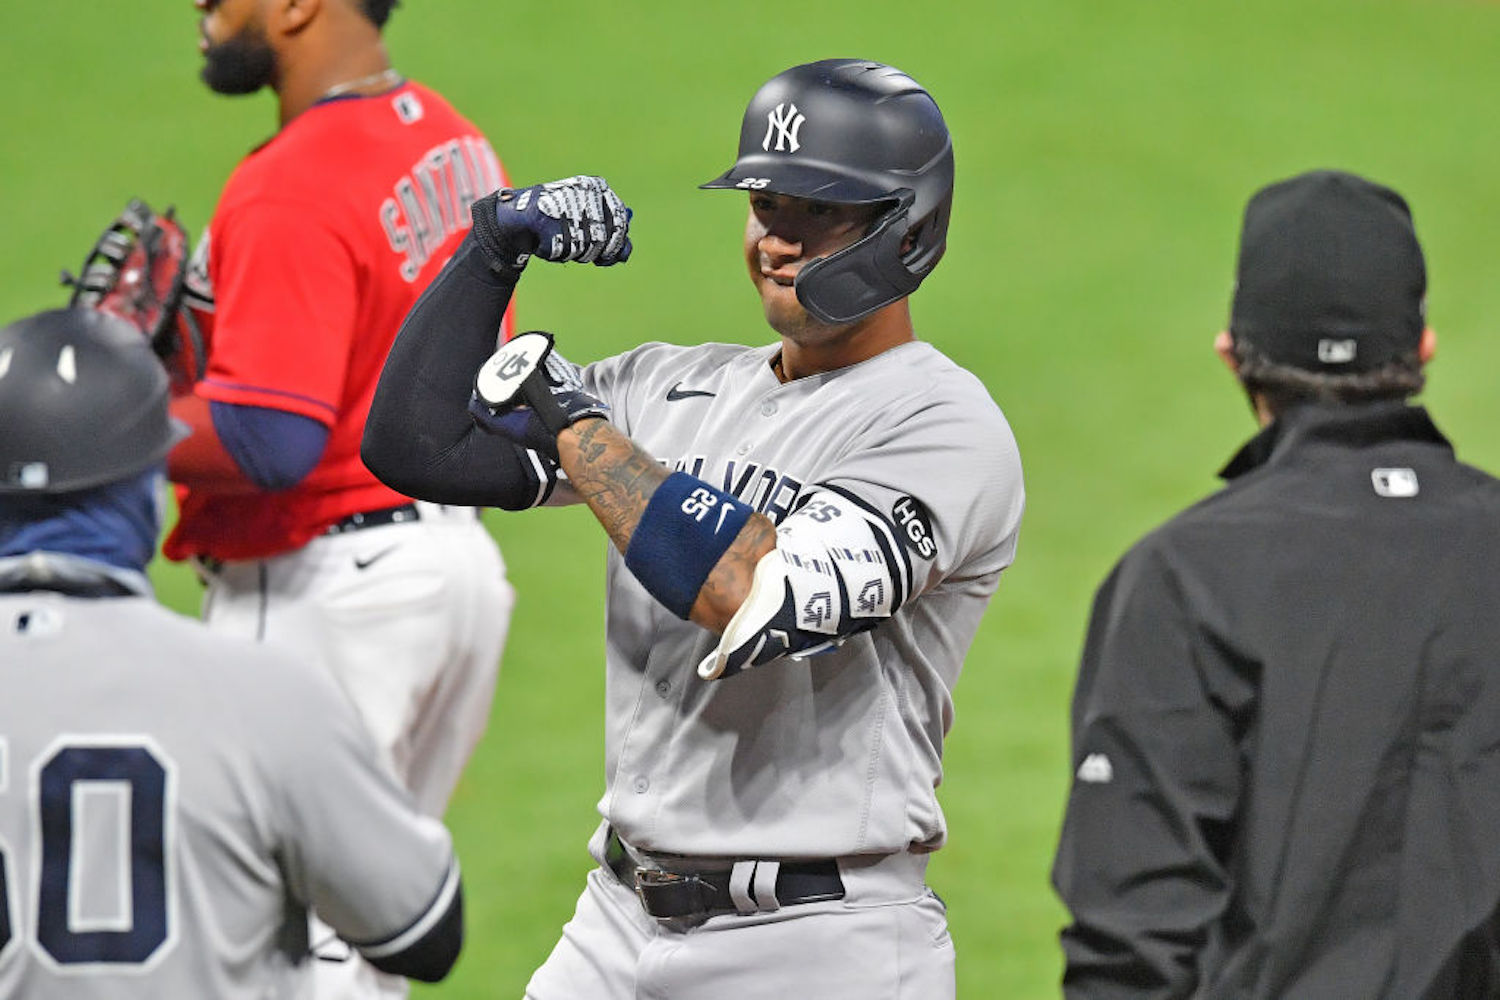 The New York Yankees had some question marks heading into the 2020 MLB postseason, but they answered all of them and more on Tuesday.